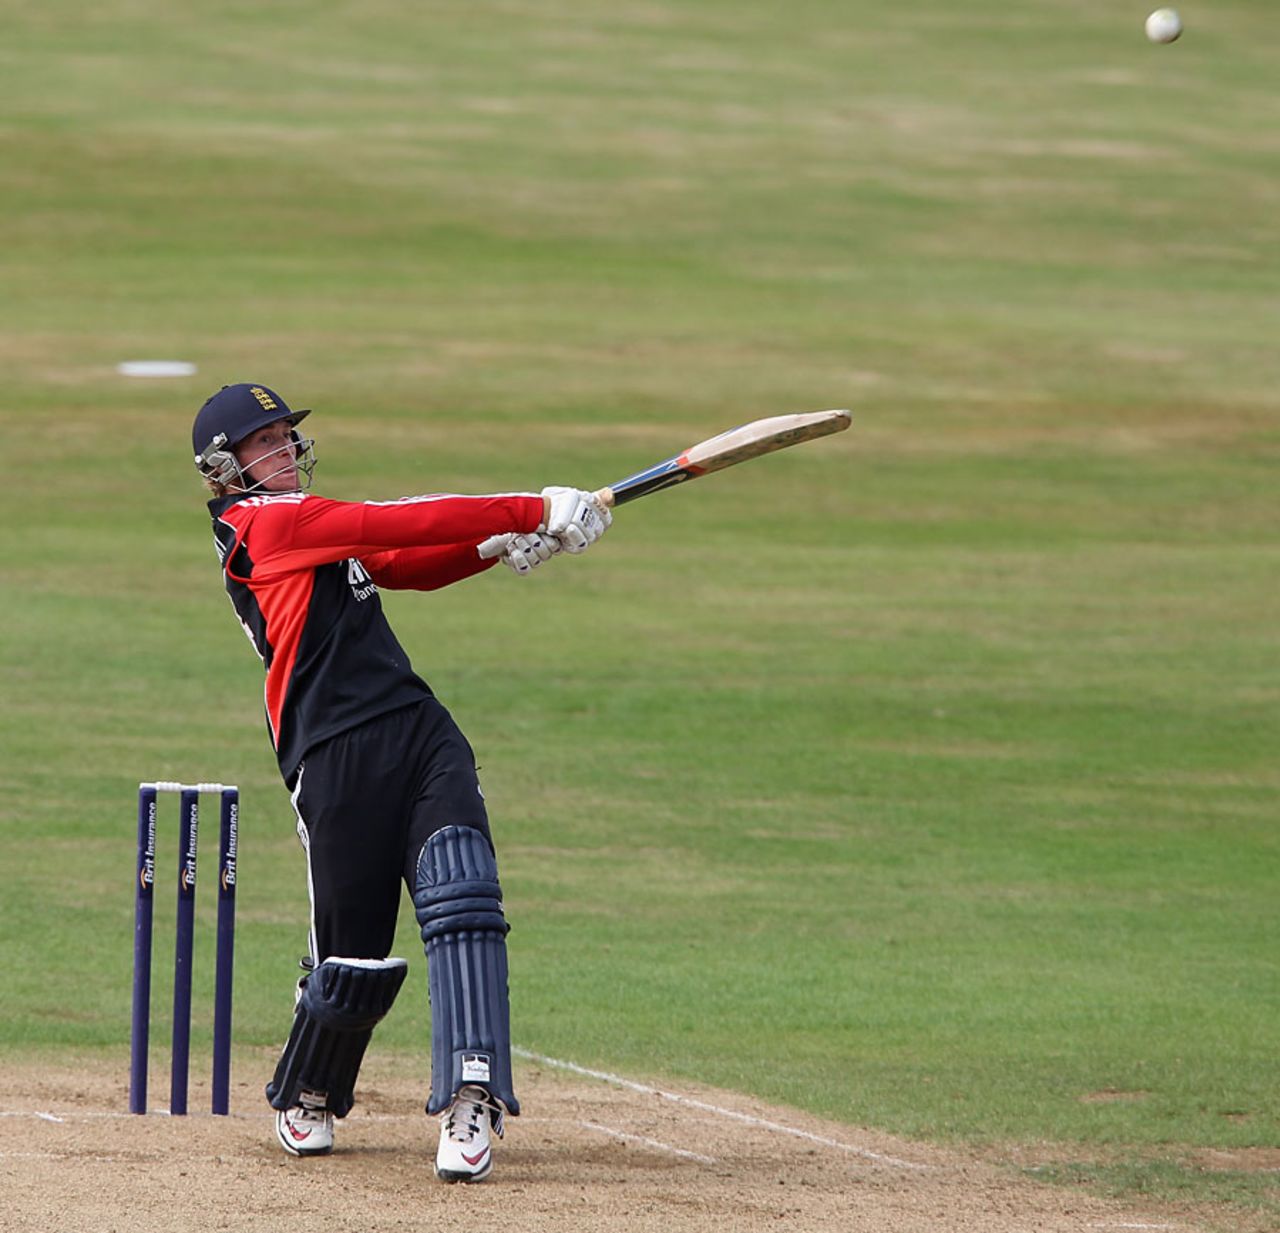 Adam Ball helped his team to victory with 42 from 47 balls, England Under-19 v South Africa Under-19, 2nd ODI, Northampton 